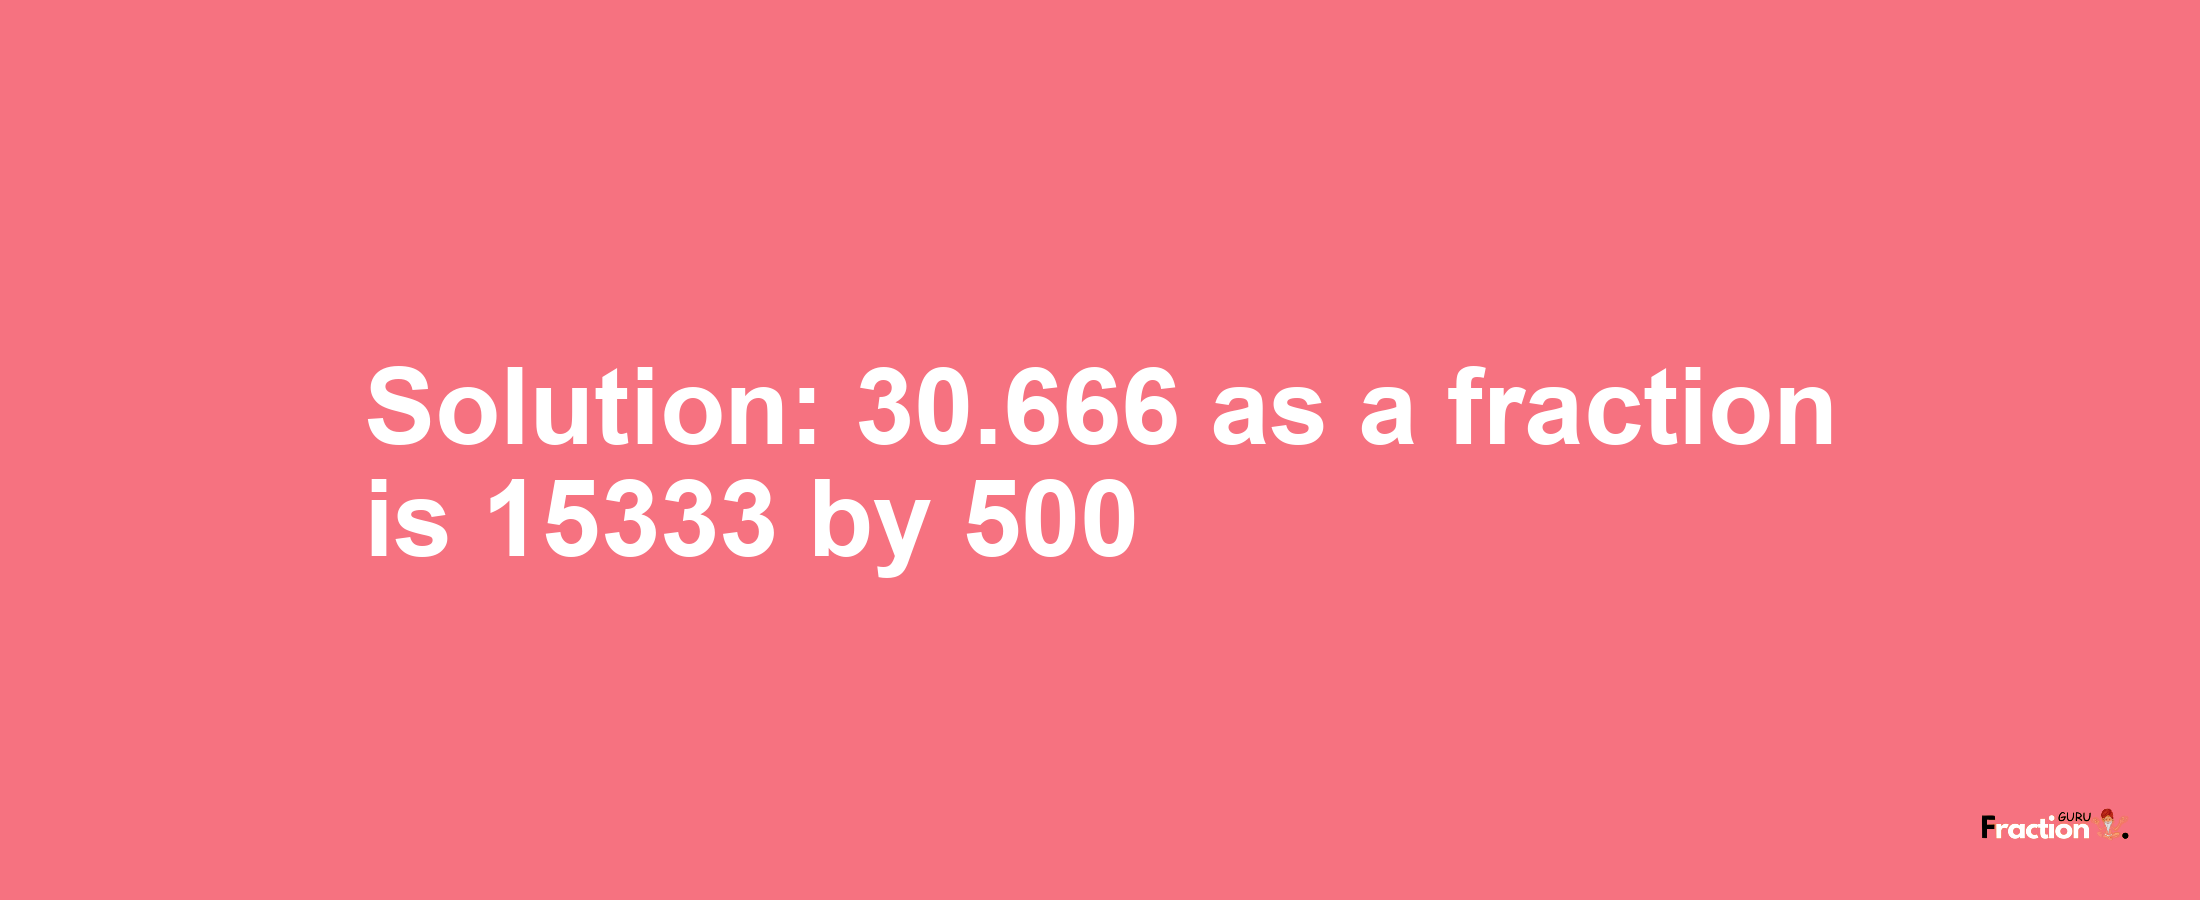 Solution:30.666 as a fraction is 15333/500